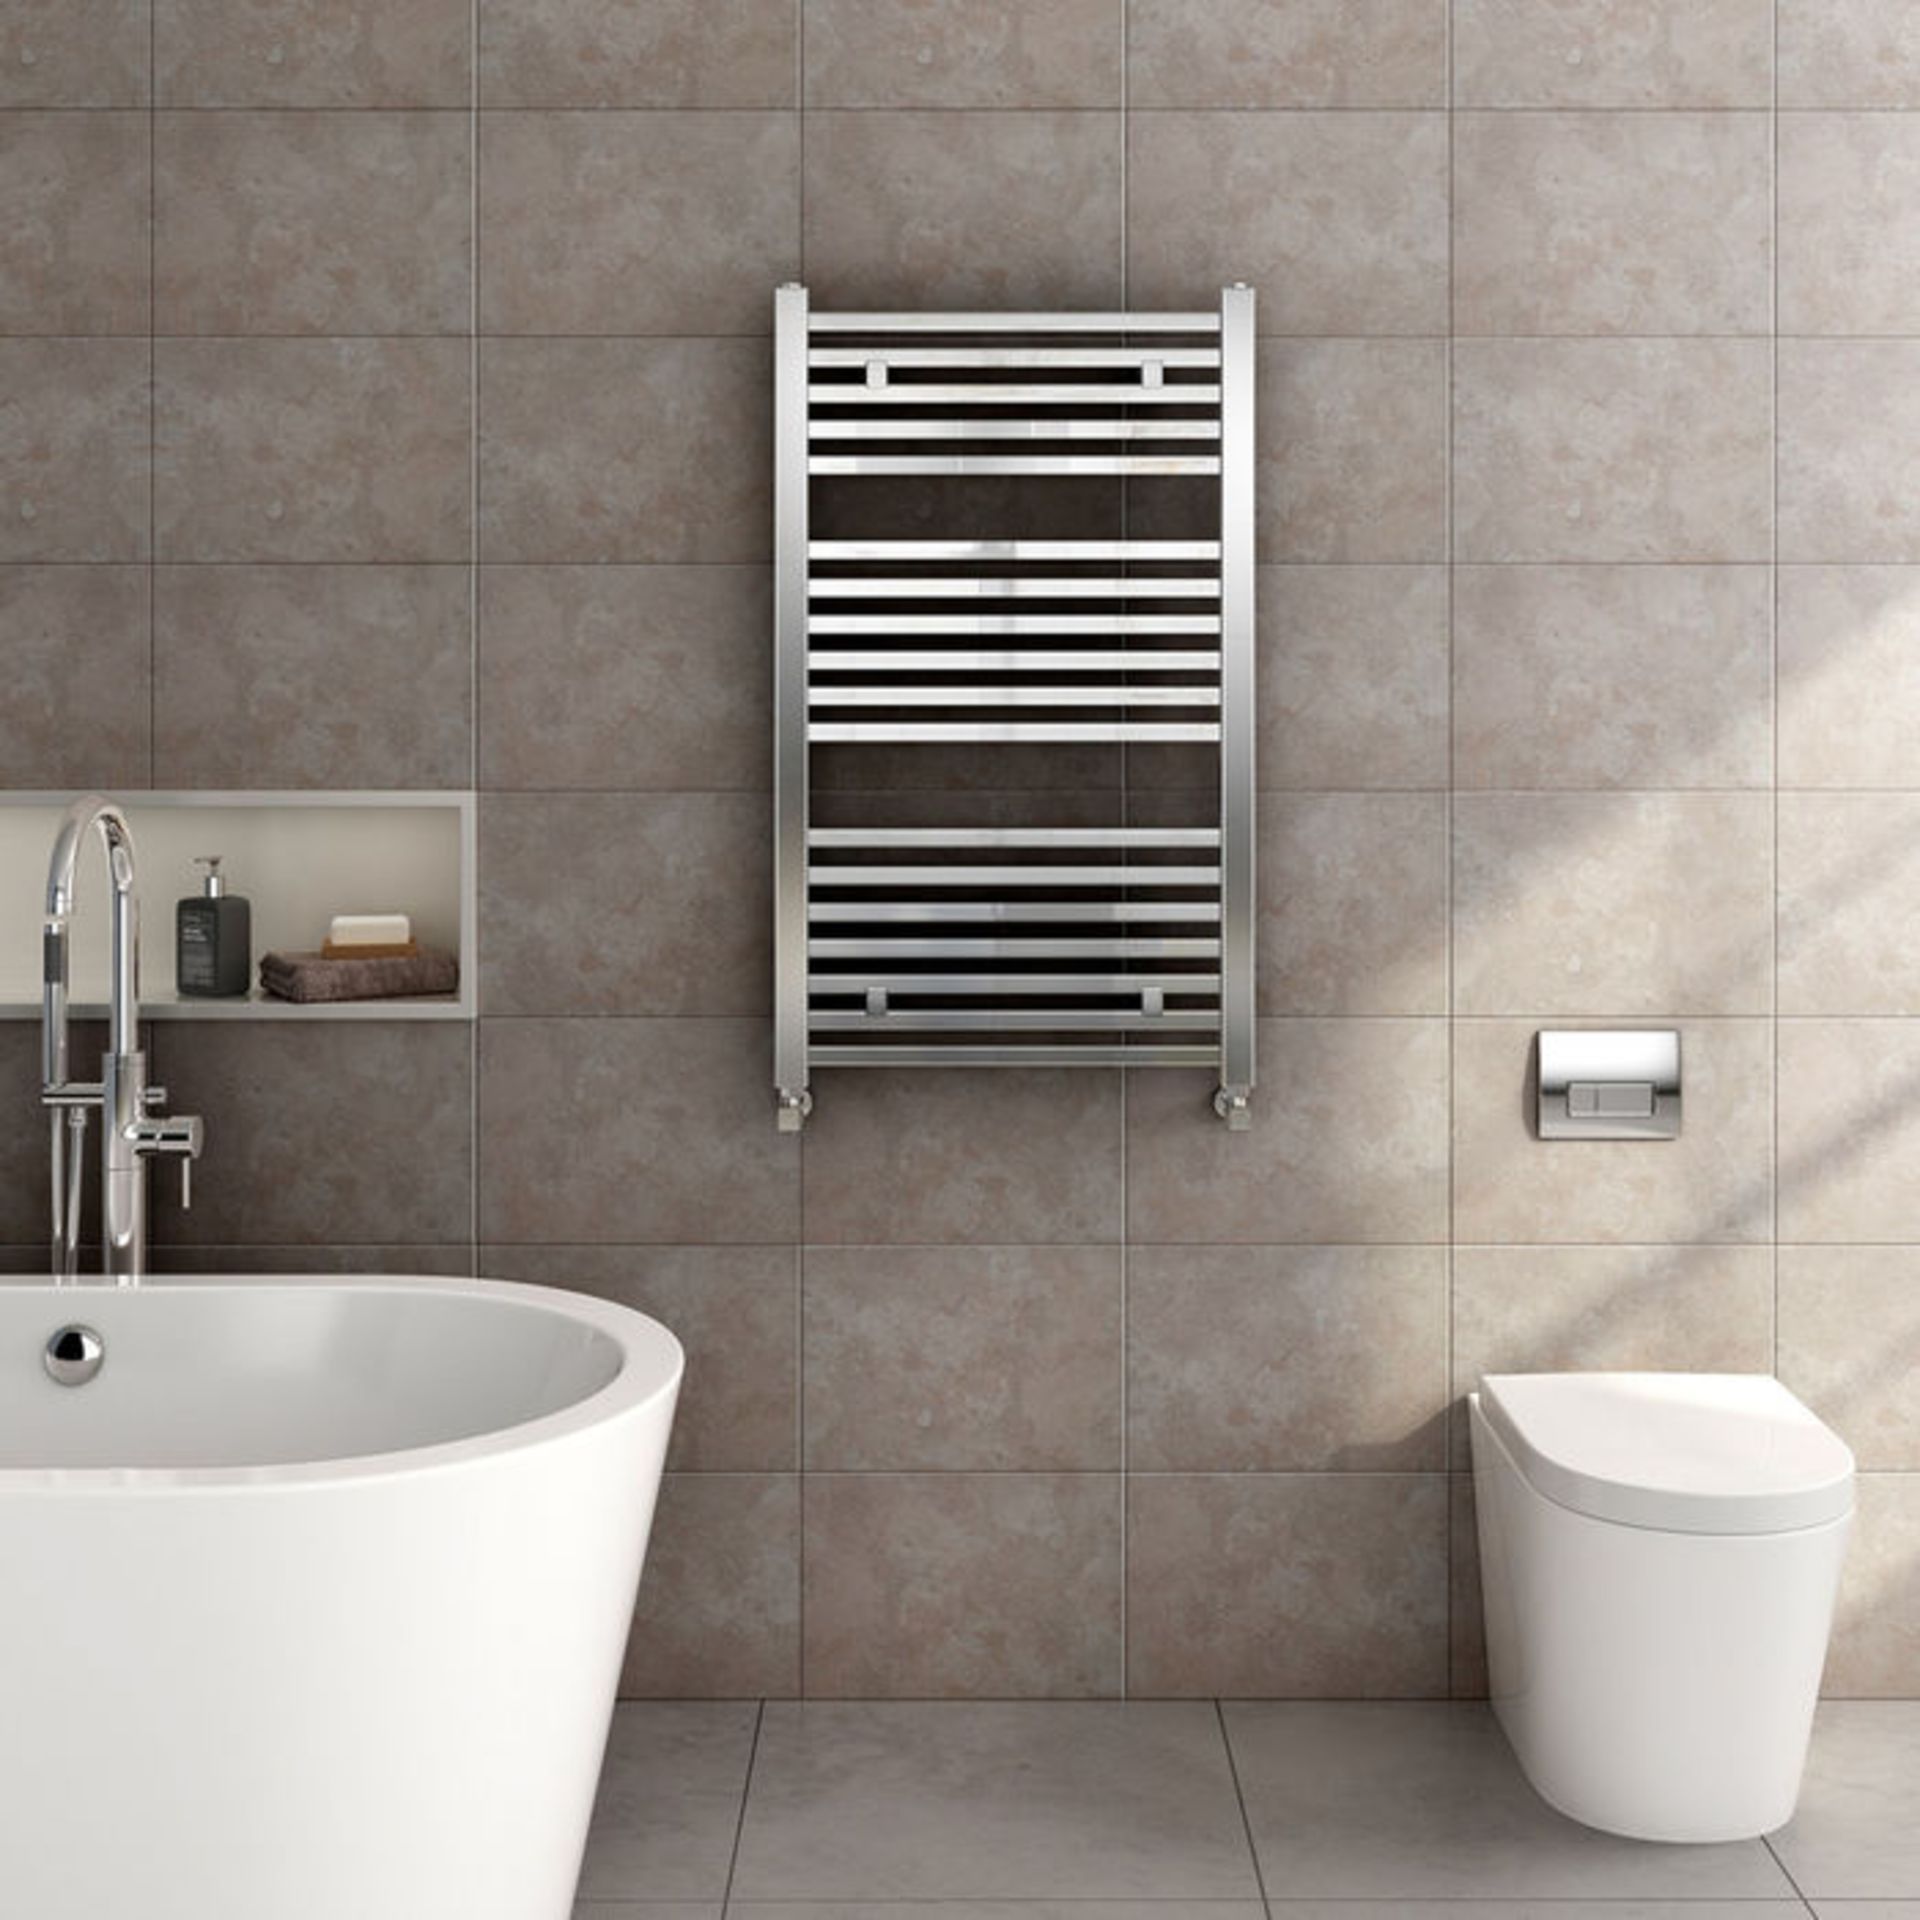 (G53) 1000x600mm Chrome Square Rail Ladder Towel Radiator RRP £226.99 Low carbon steel chrome plated - Image 3 of 4